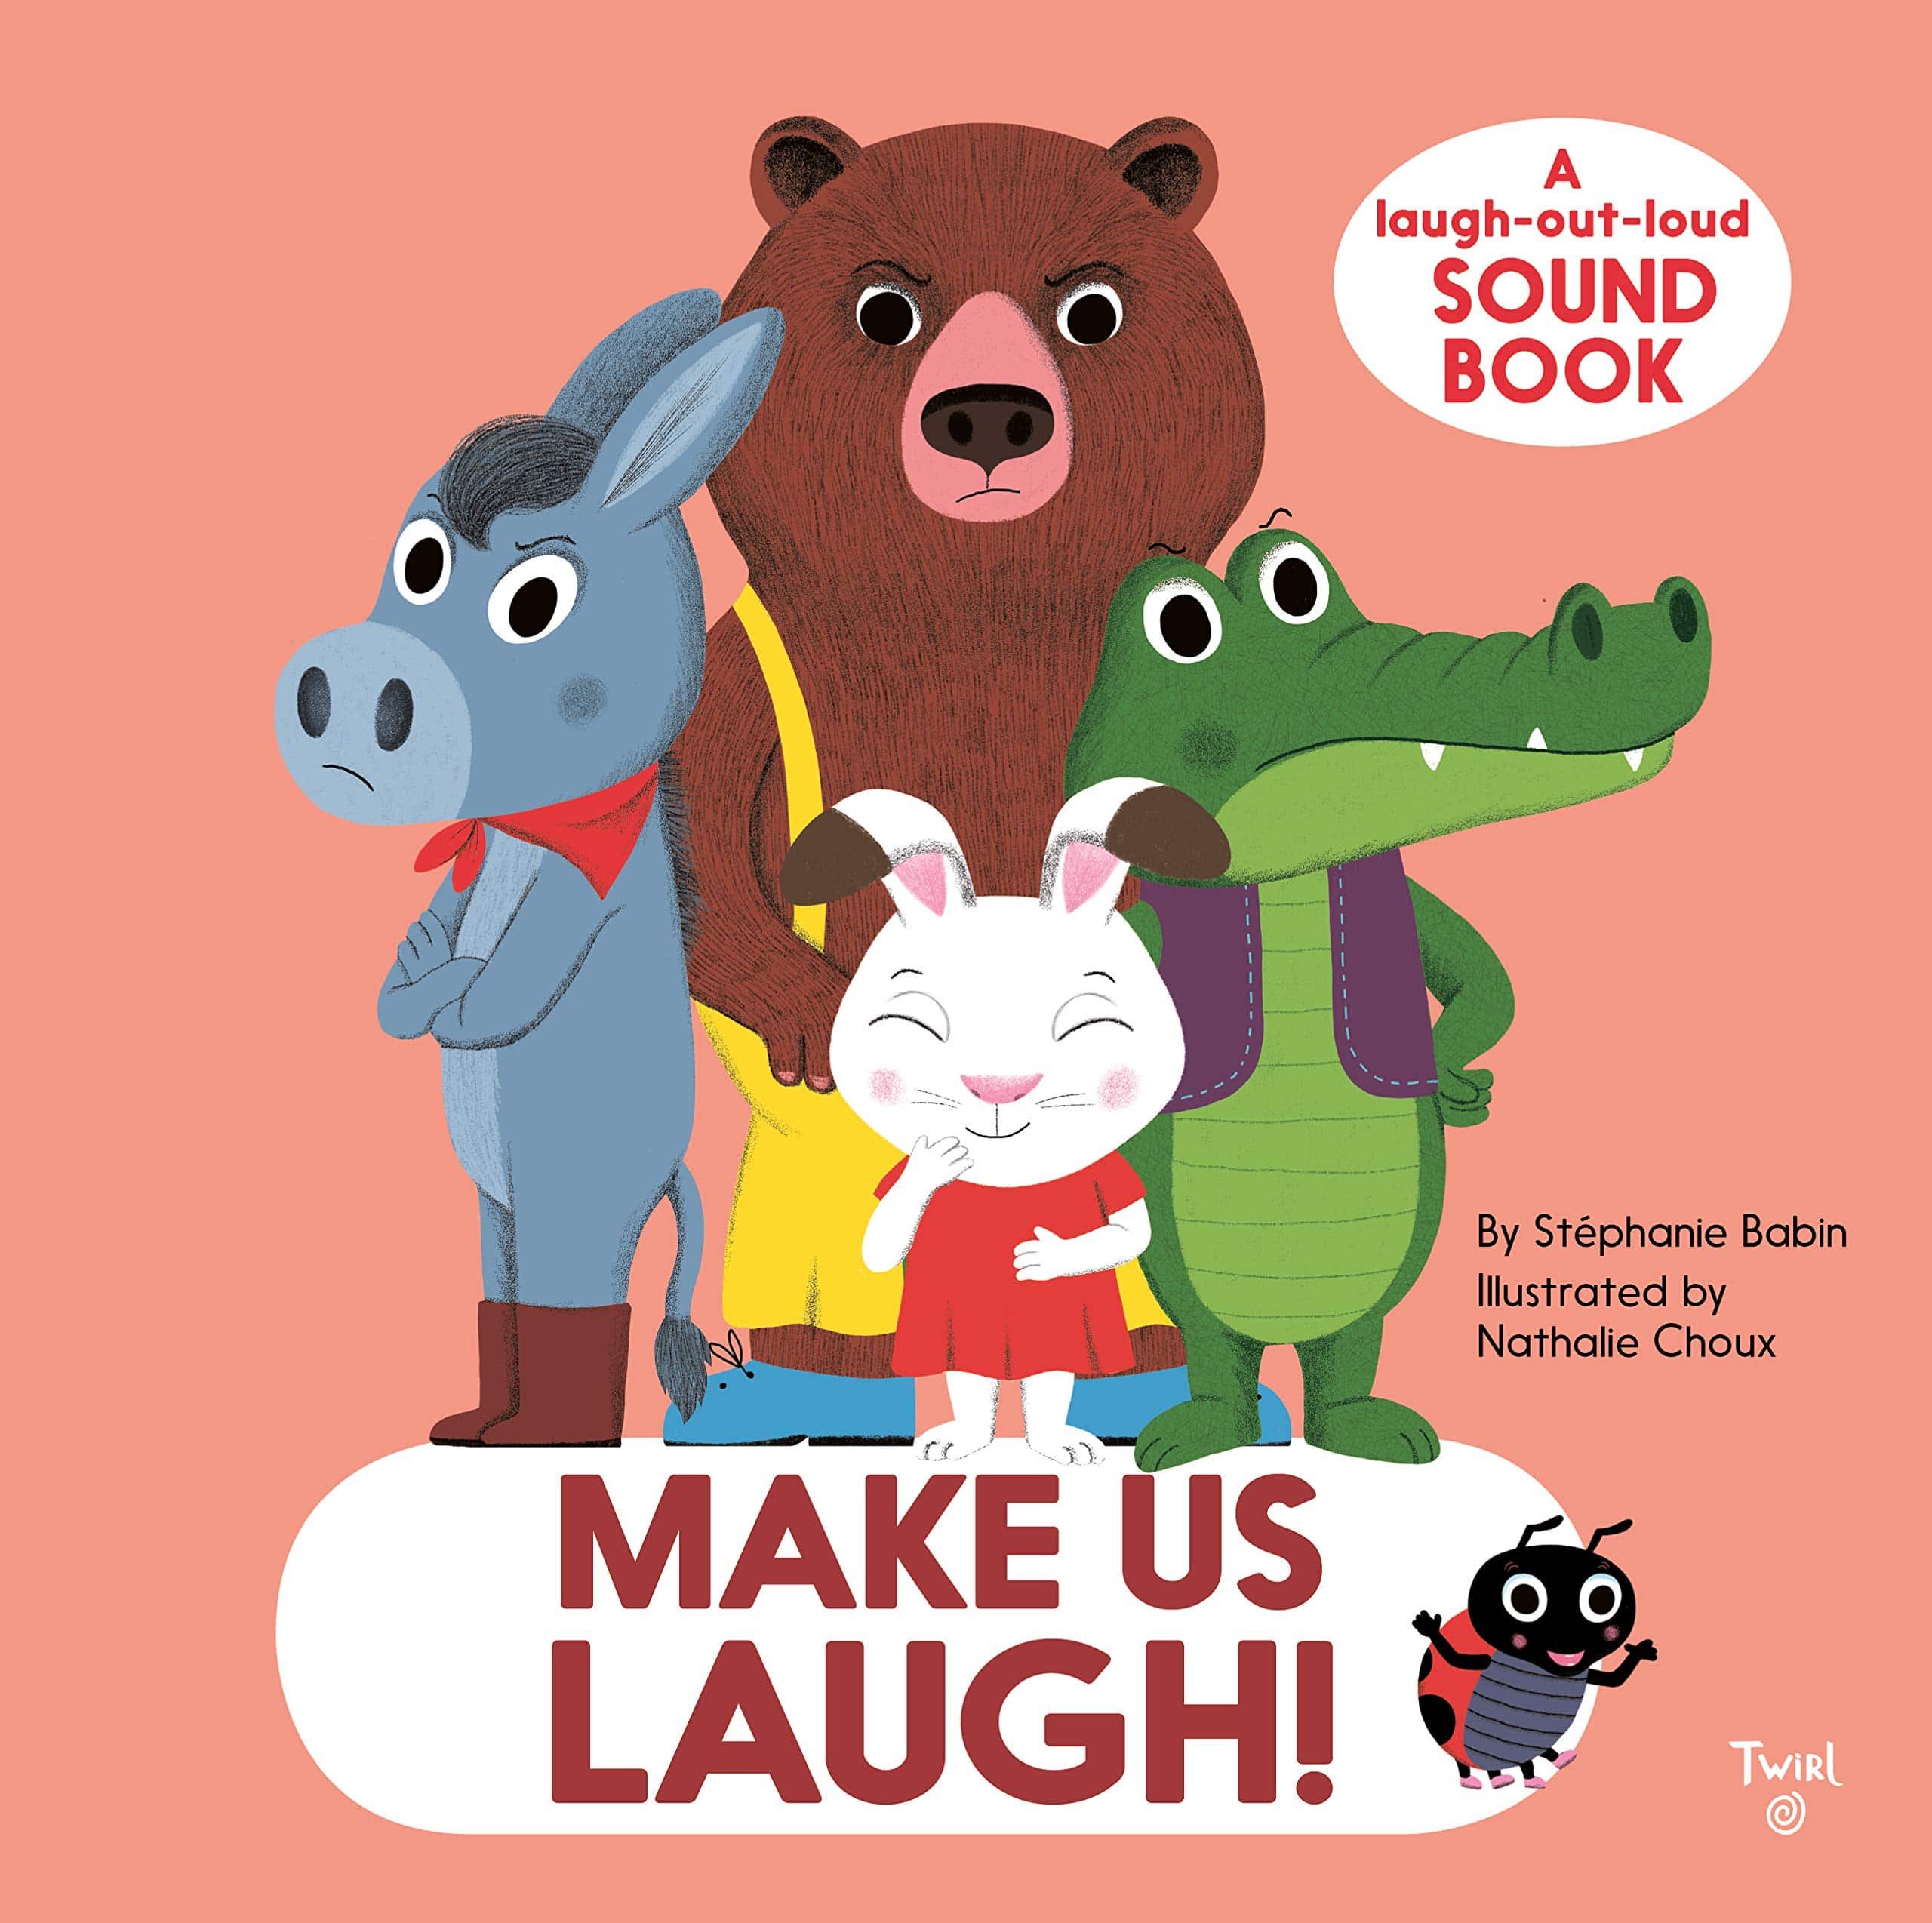 Make Us Laugh!: A Laugh-Out-Loud Sound Book - Twinkle Twinkle Little One